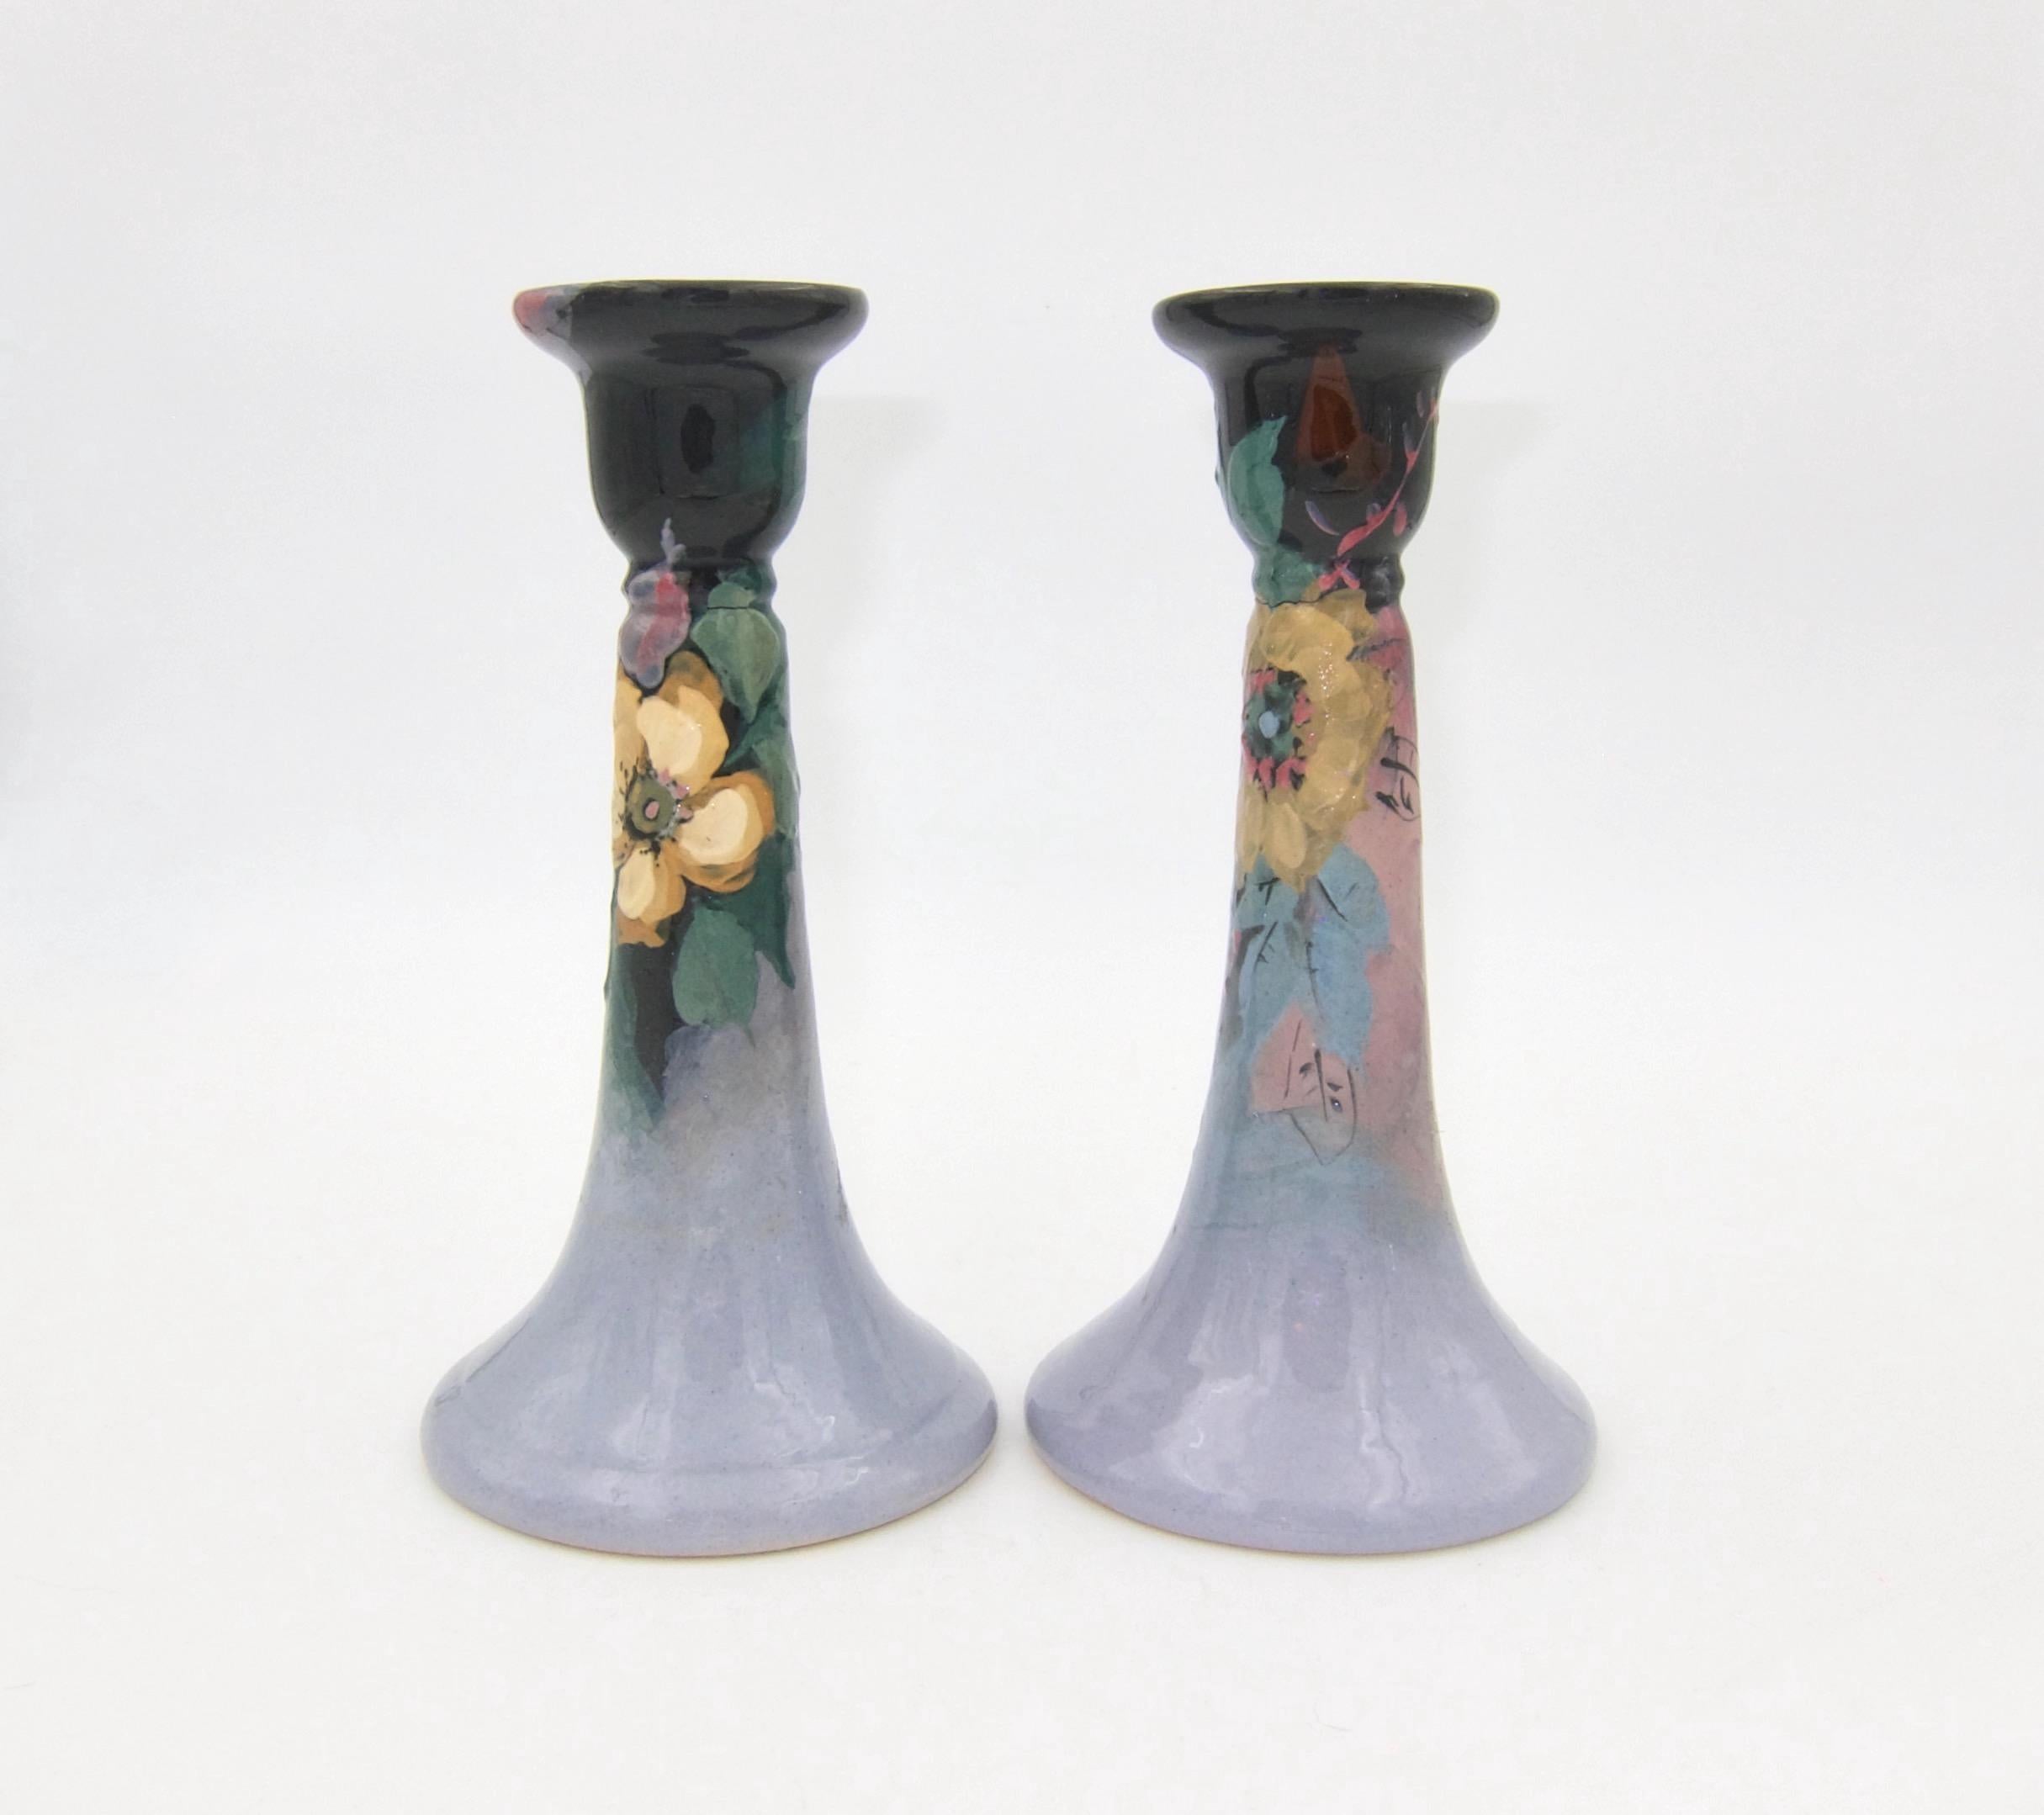 A pair of American Arts & Crafts candle holders from Weller Pottery of Zanesville, Ohio. The antique candlesticks are from Weller's Eocean late line of hand-decorated art pottery. Weller introduced the Eocean decor in 1898, producing it for 20 years